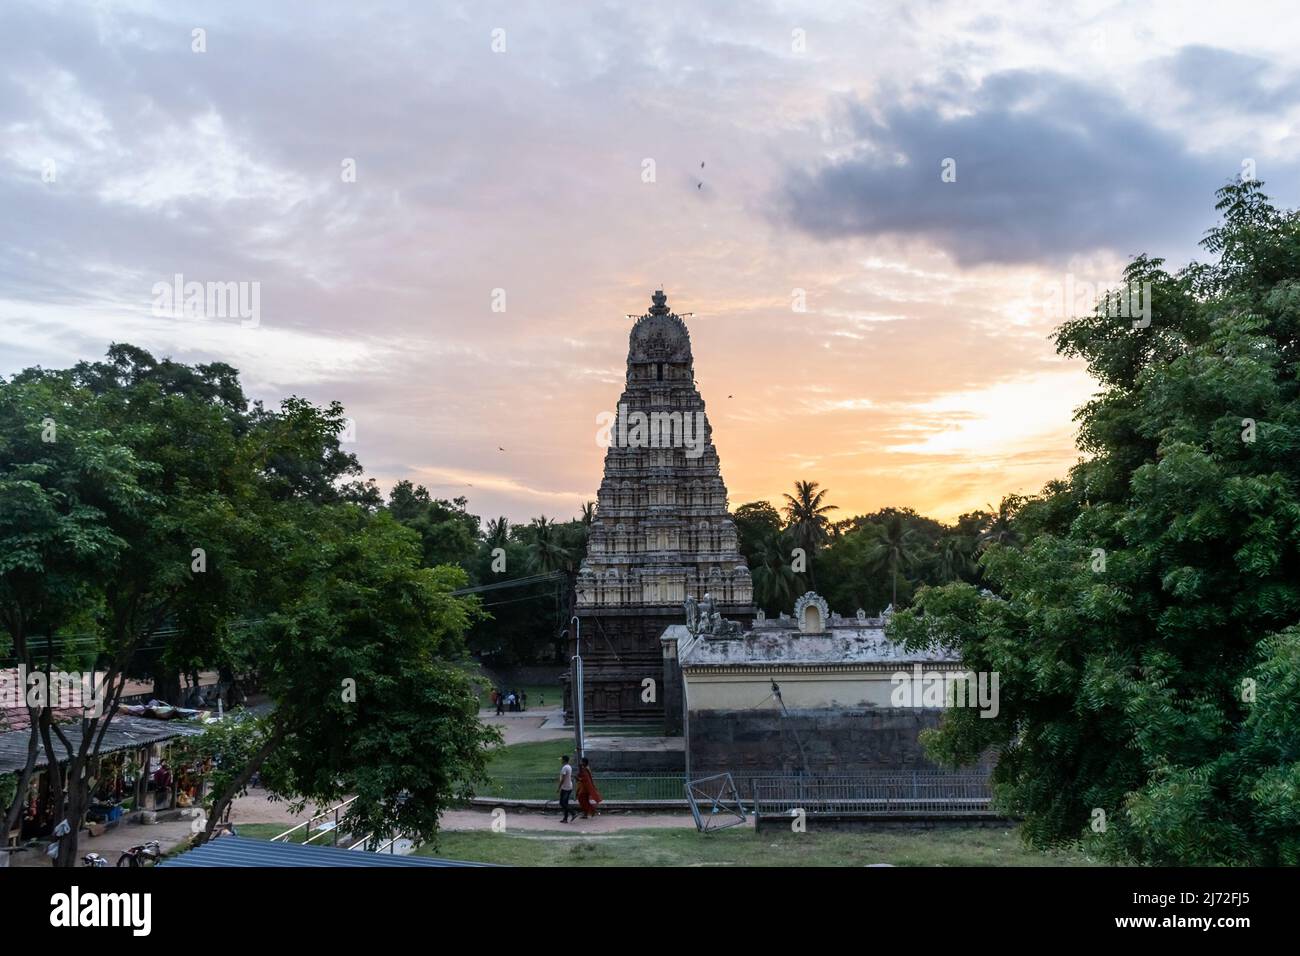 Vellore, Tamil Nadu, India - September 2018: The tower spire of the ancient Hindu Jalakanteswarar temple inside the Vellore Fort complex at sunset. Stock Photo